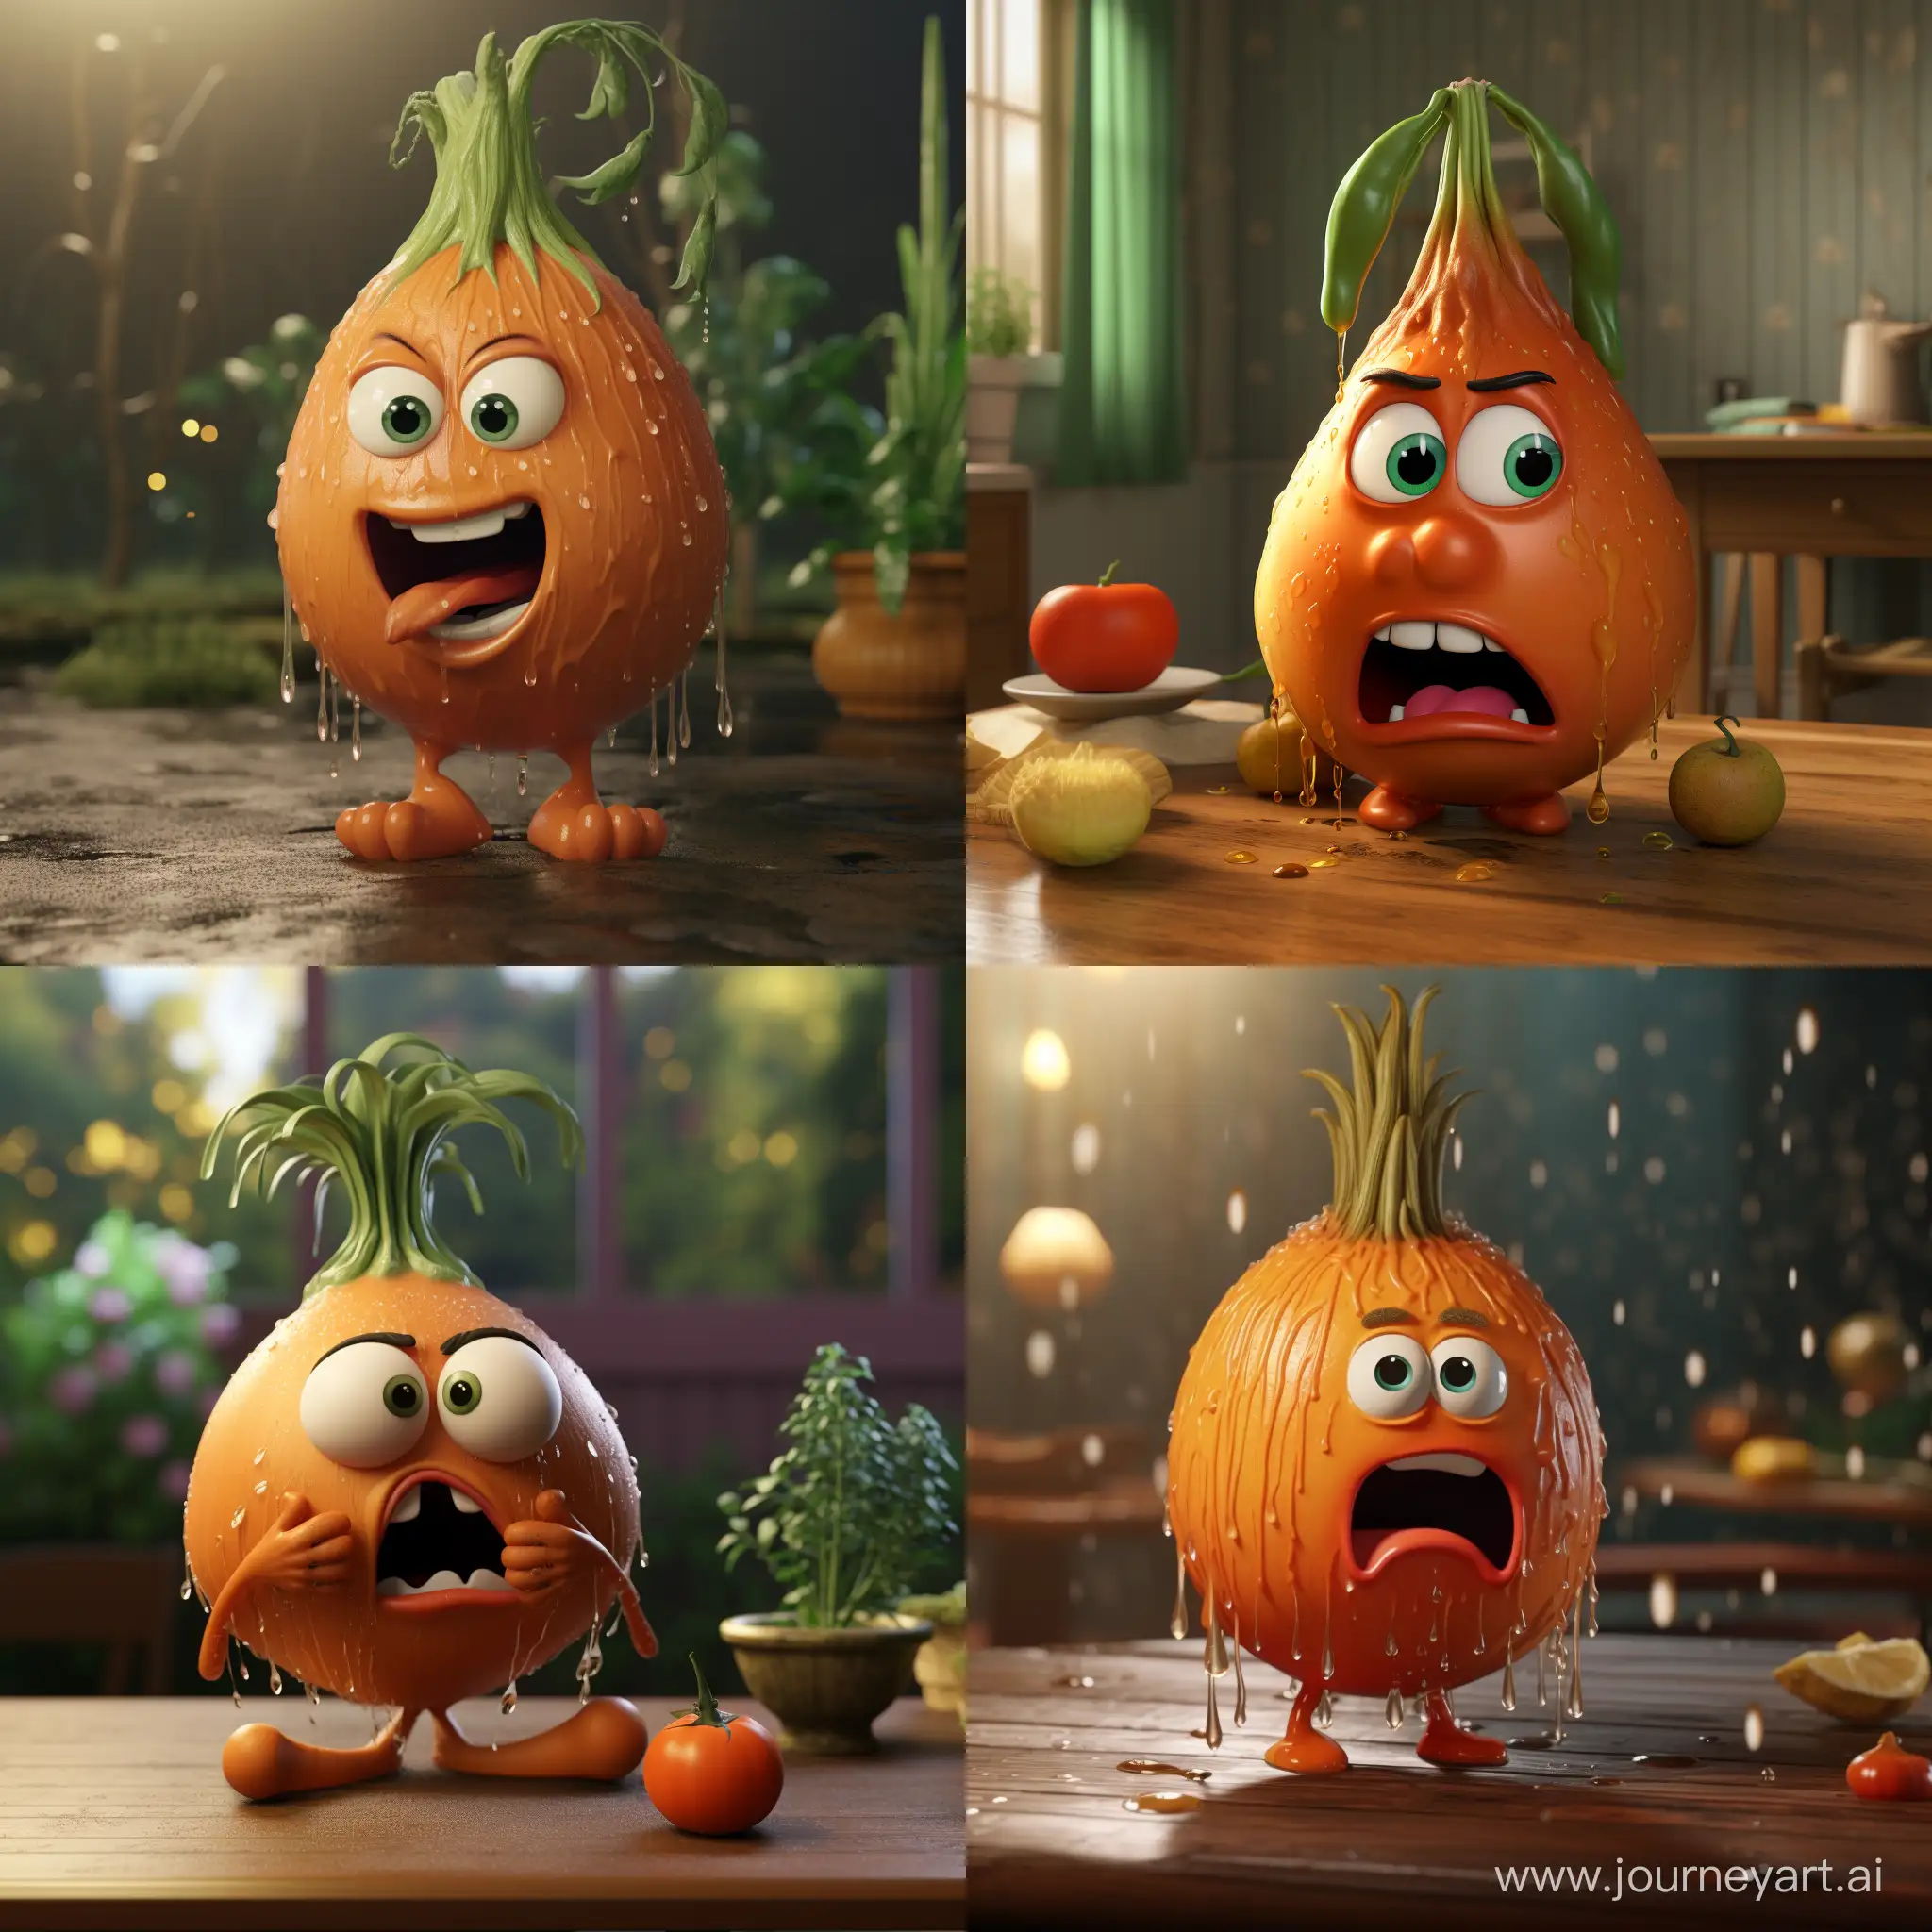 Emotional-3D-Animation-Tearful-Talking-Onion-in-Square-Format